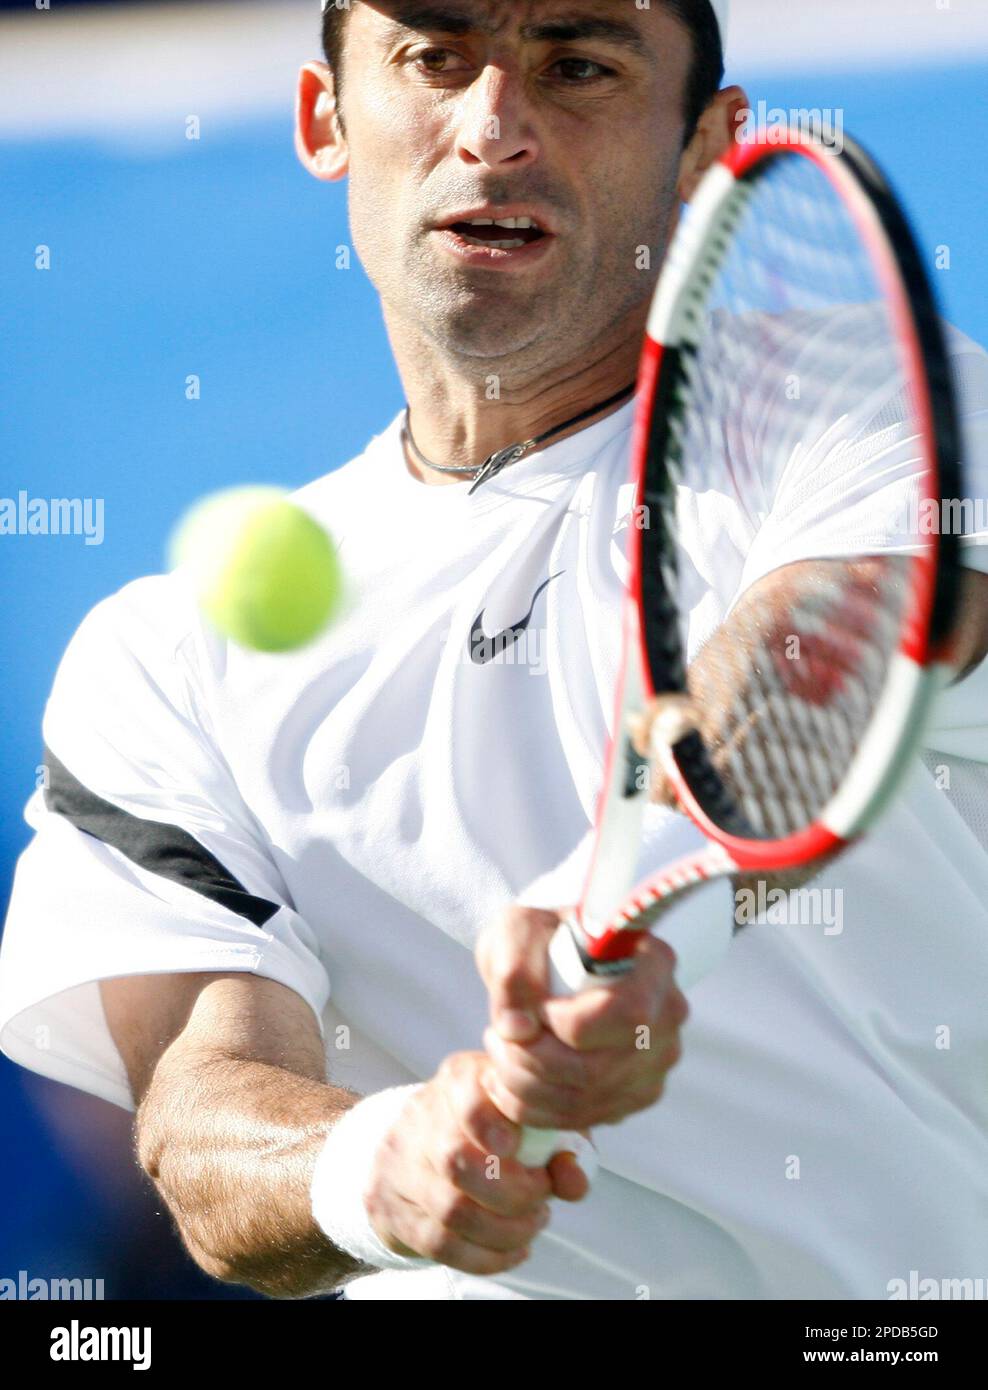 Armenian Sargis Sargsian returns the ball to Nicolas Kiefer of Germany during the first round of the Tennis Channel Open tennis tournament in Las Vegas, Tuesday, Feb